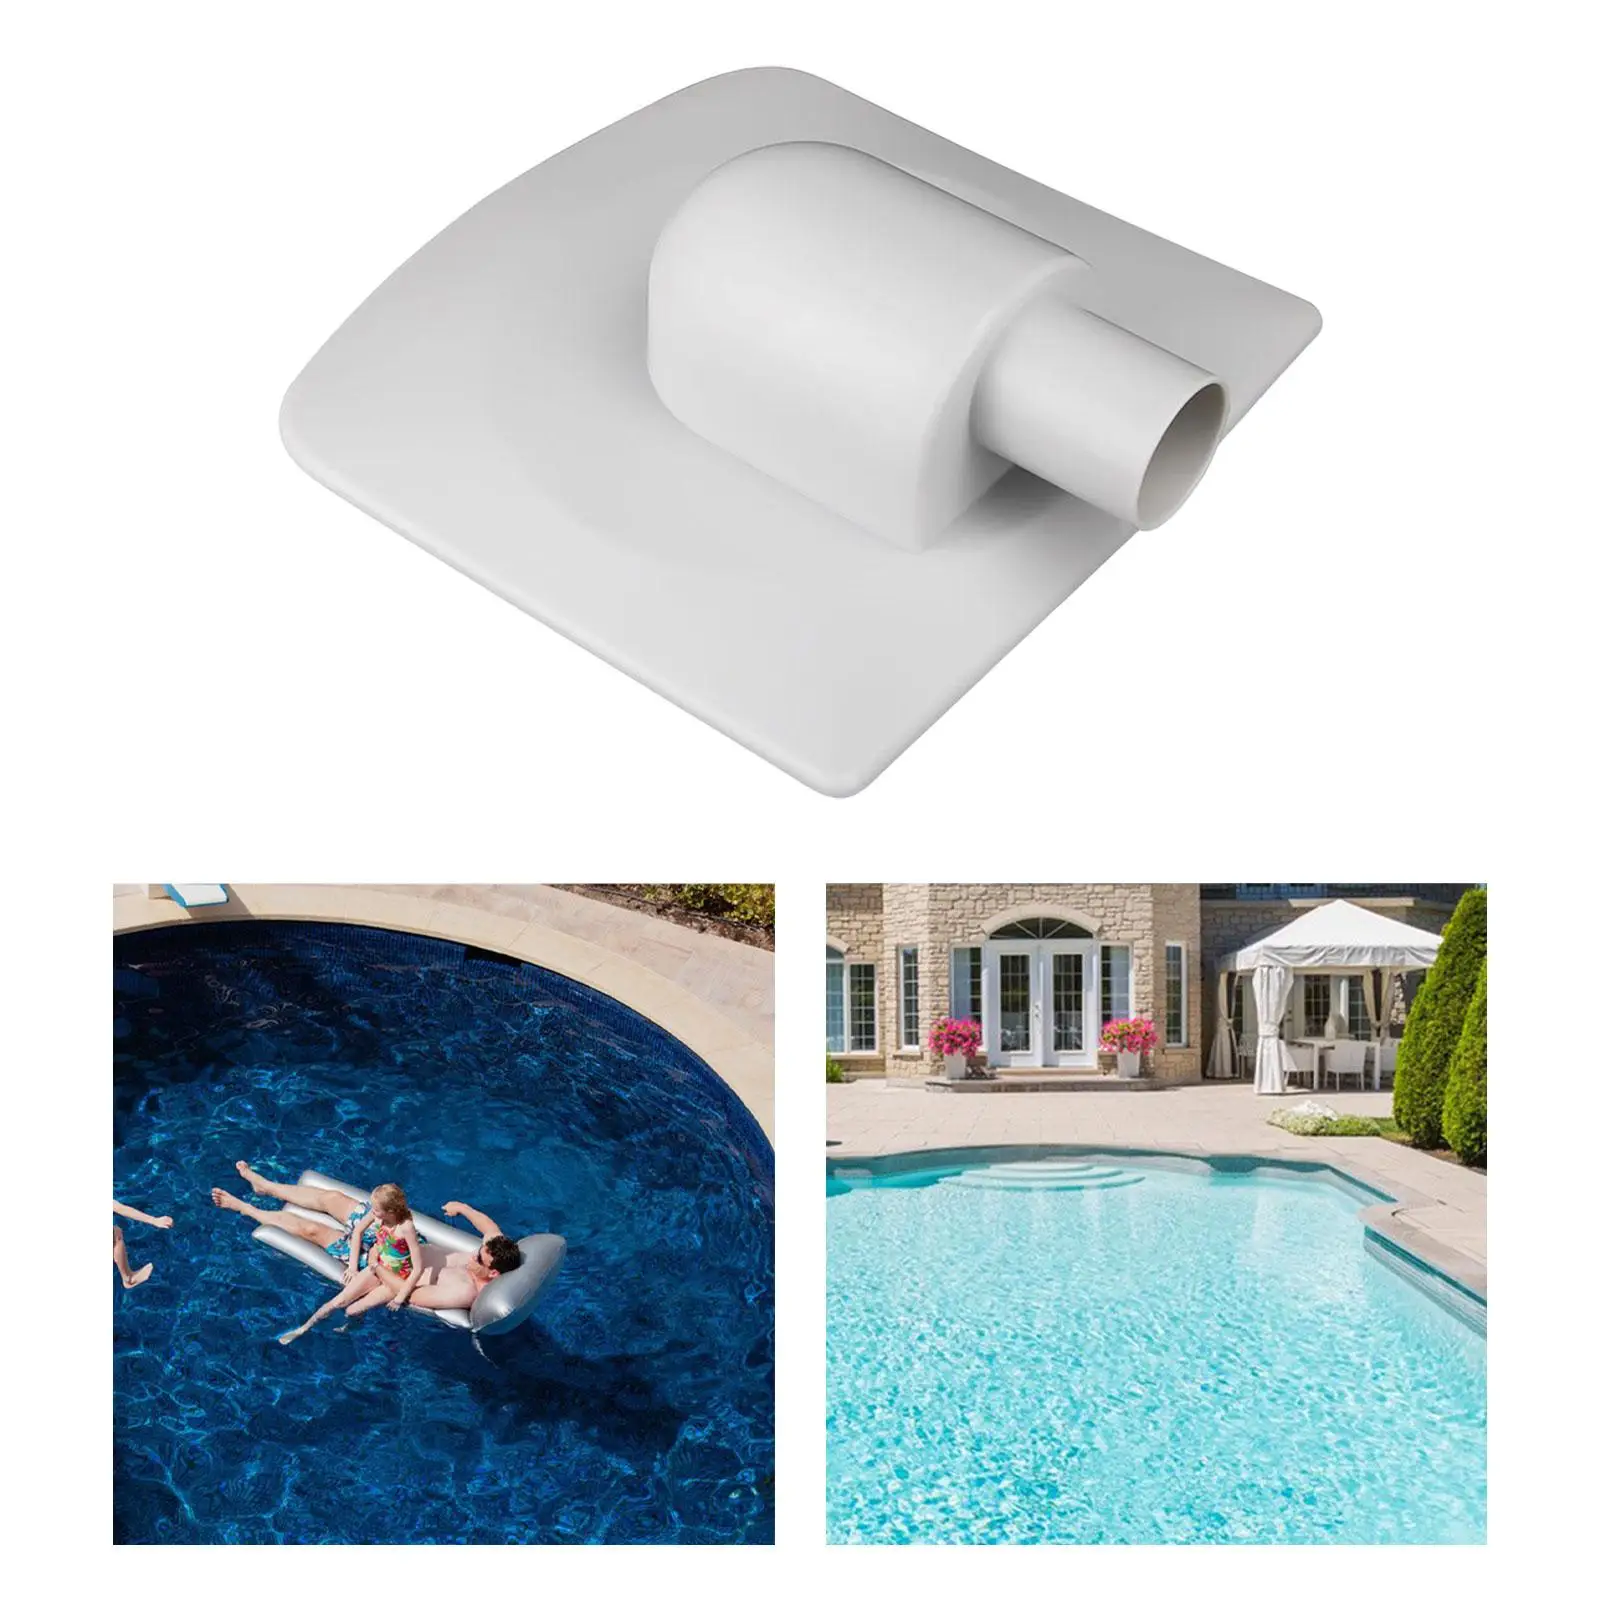 Pool Skimmer Plate Replacement Summer Swimming Pools Parts Accessories Pool